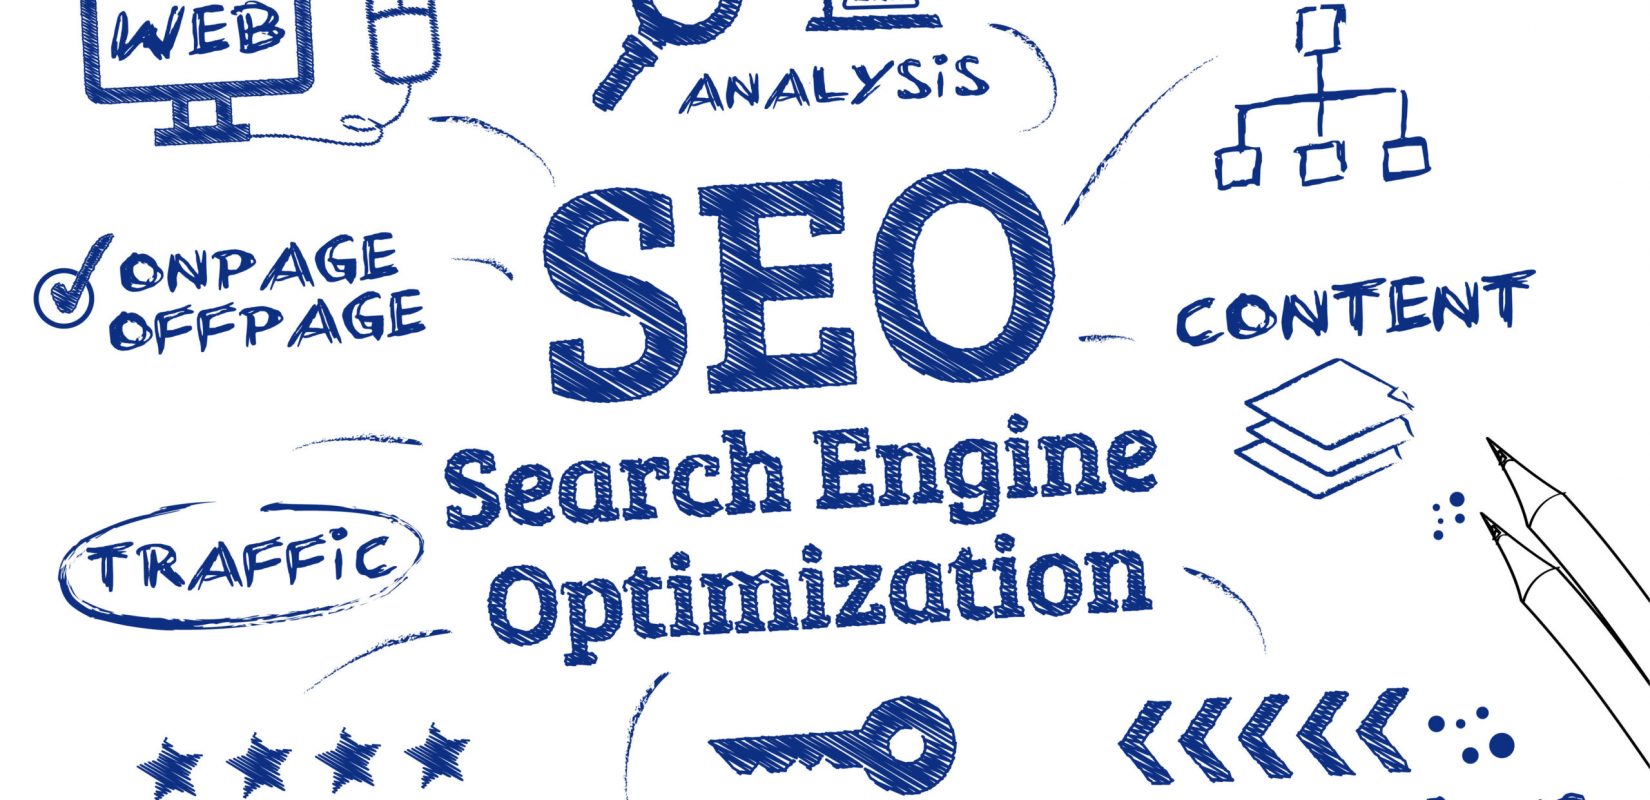 A graphic displaying all the details that factor into Search Engine Optimization